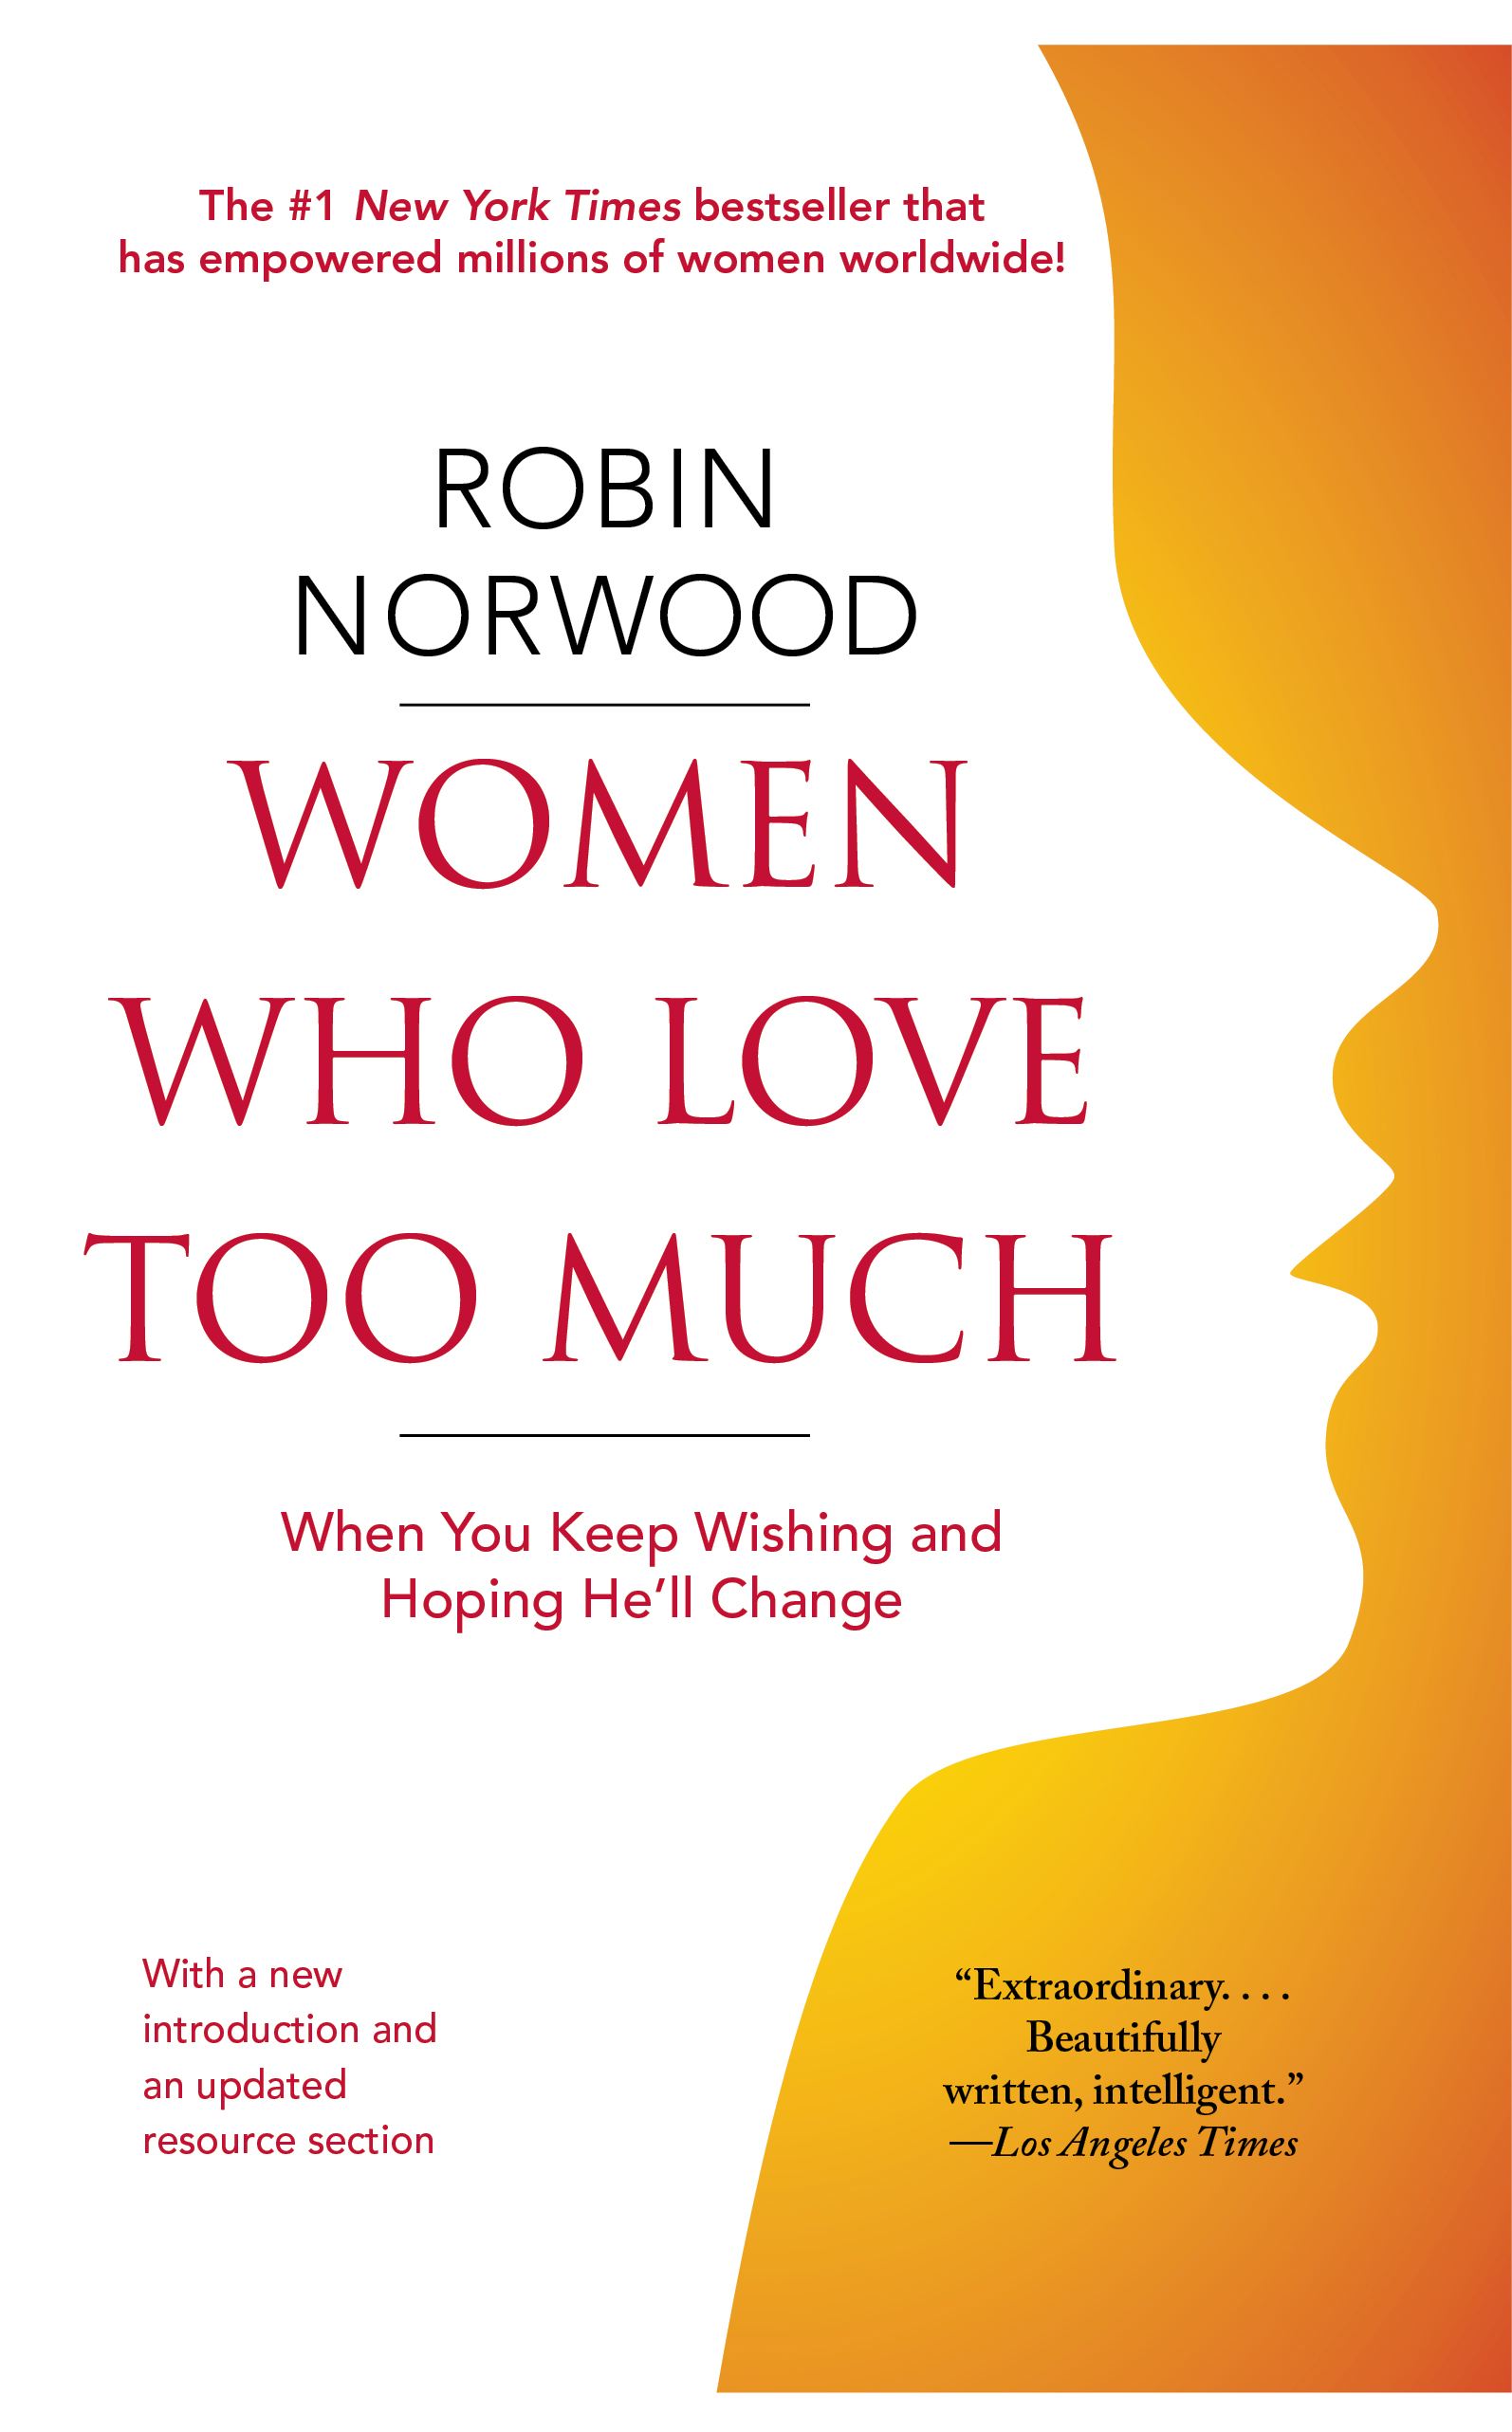 Women Who Love Too Much (Paperback) - image 1 of 1